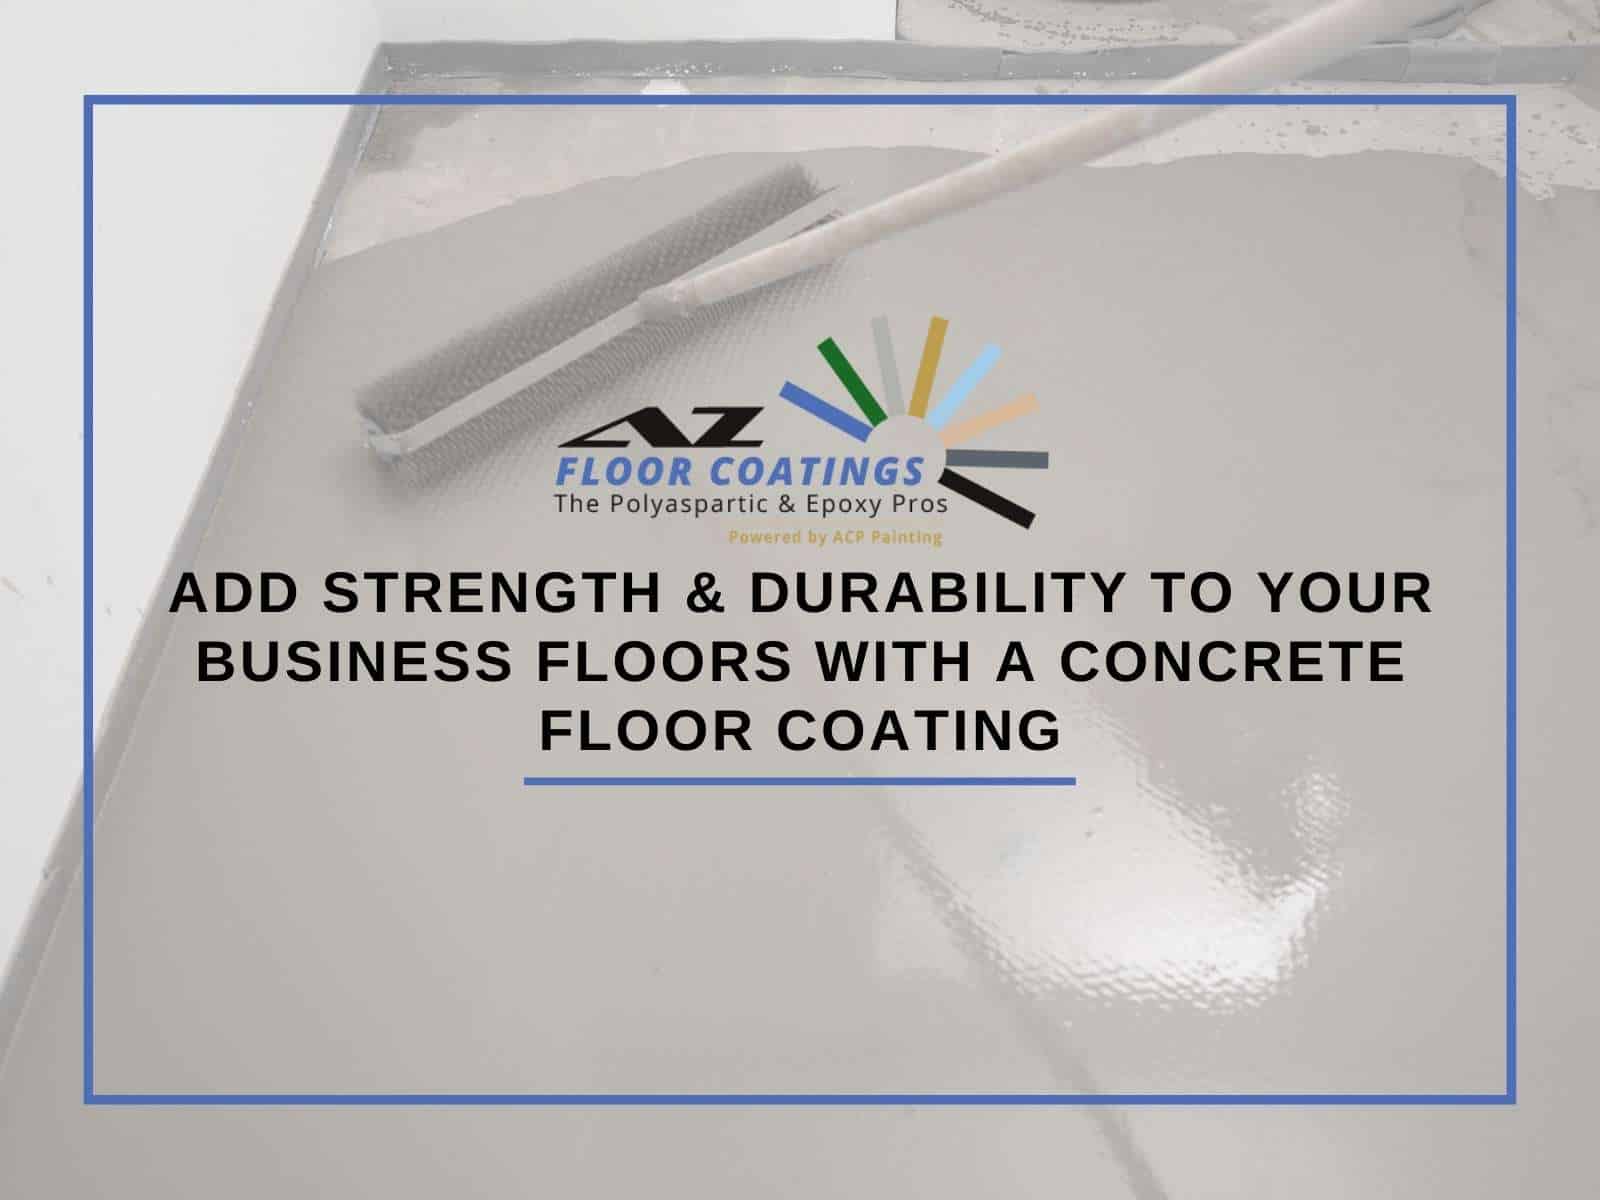 Add Strength & Durability To Your Business Floors With a Concrete Floor Coating